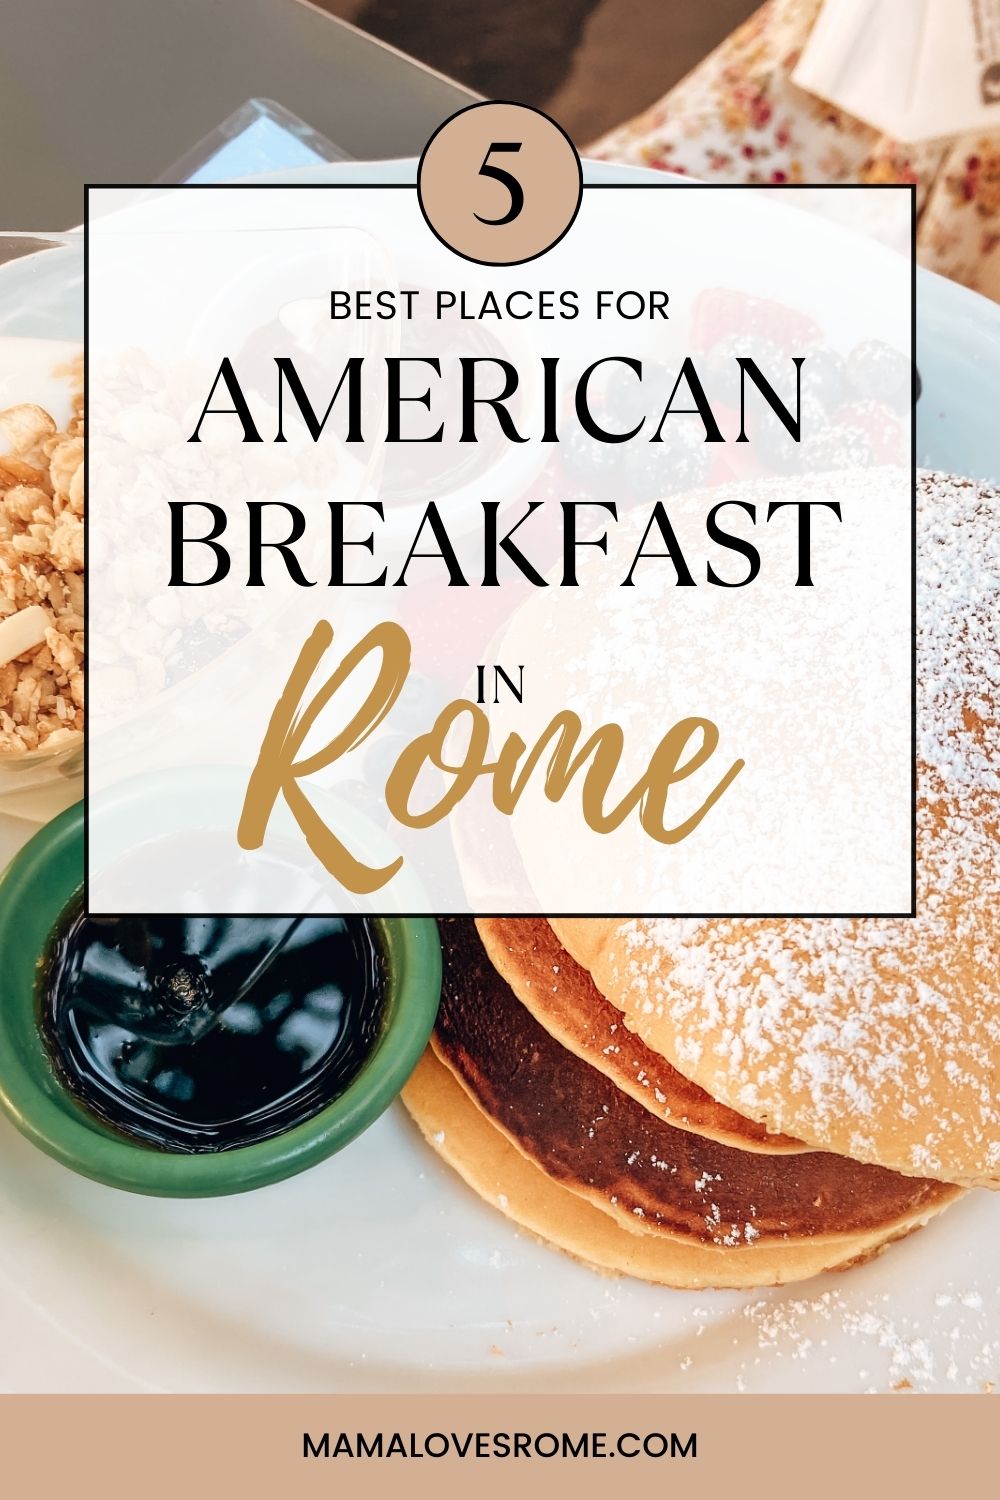 Image of pancakes, chocolate and granola dish with title: best places for American breakfast in Rome 